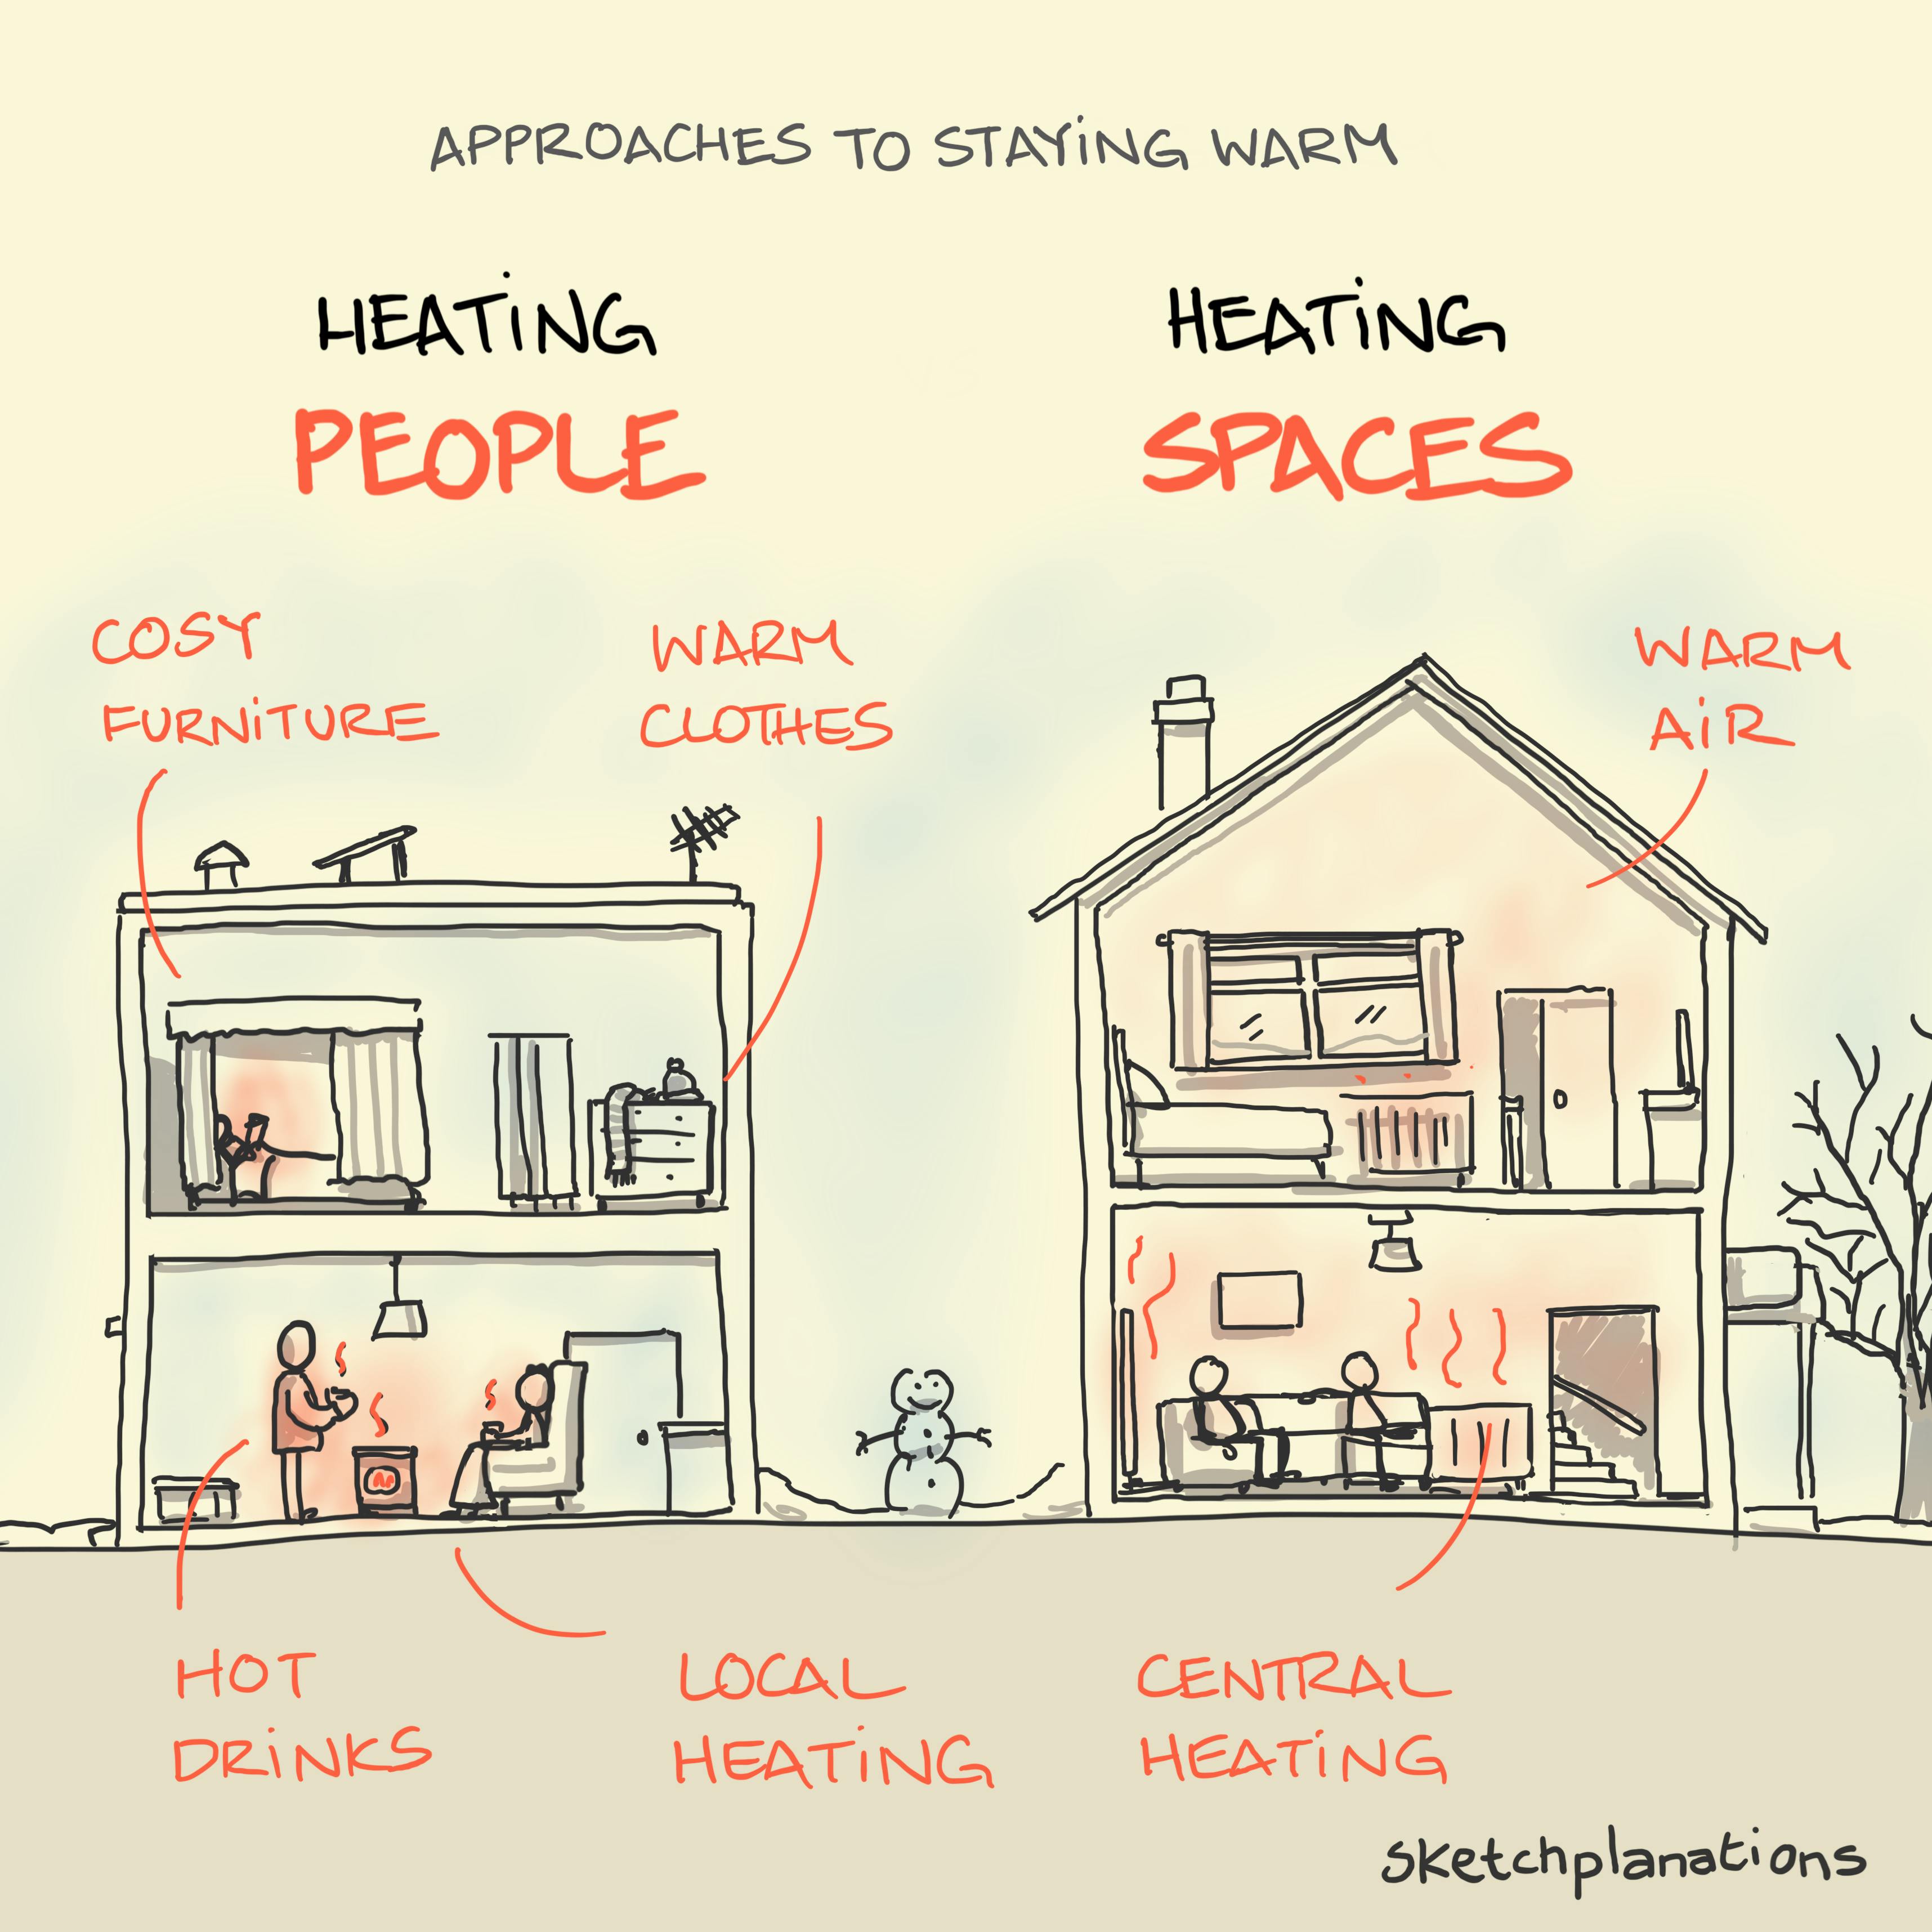 https://images.prismic.io/sketchplanations/ee655b49-63de-4ccc-ab41-30dd3b7ea820_SP+794+-+Heating+people+heating+spaces.png?auto=compress,format